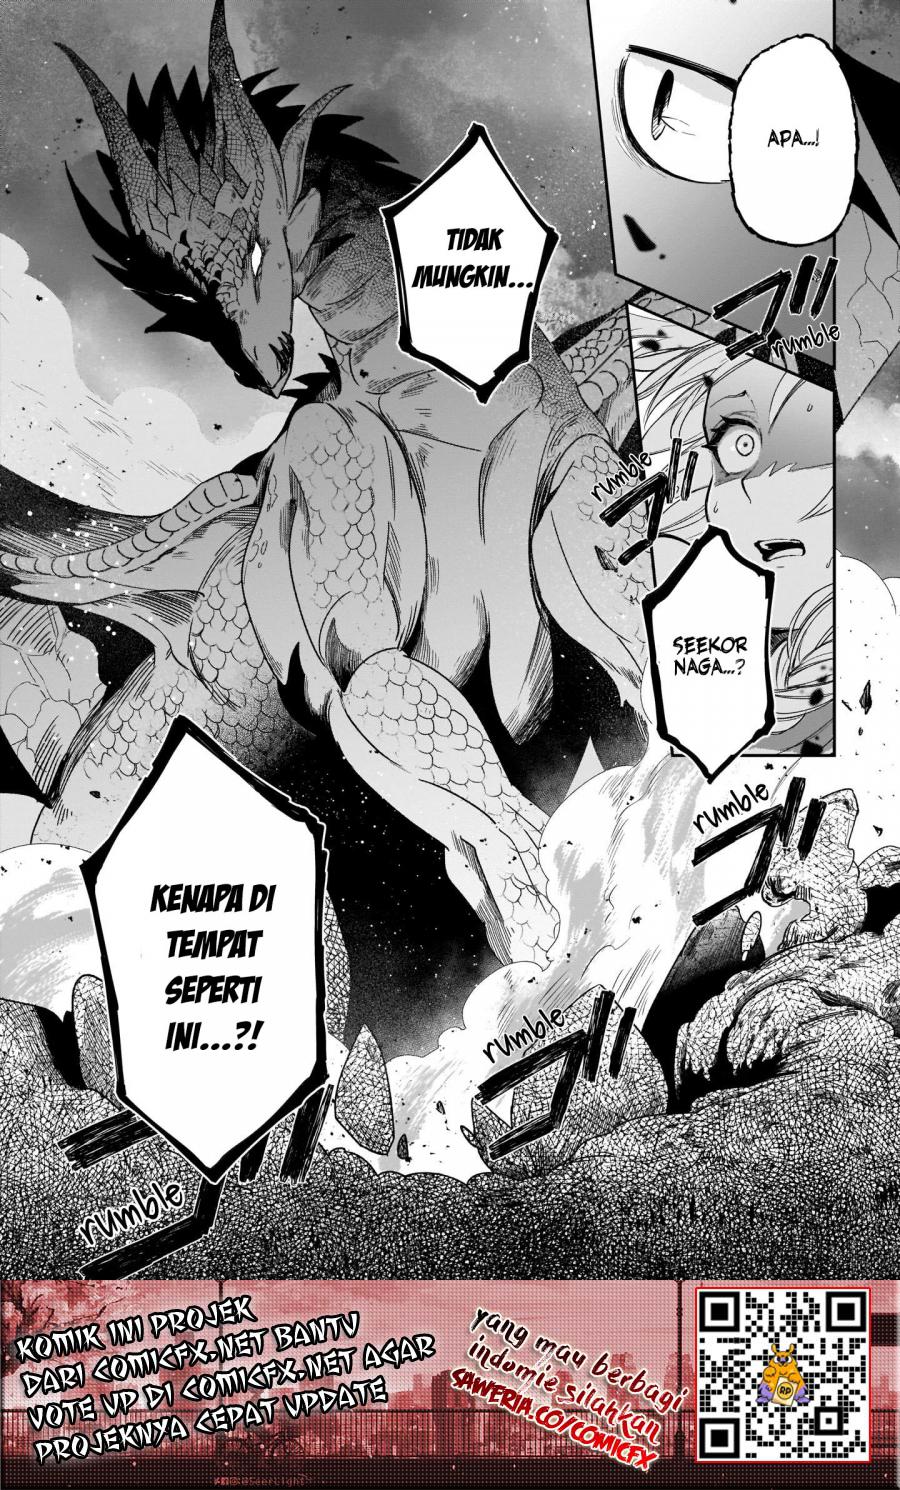 Saint? No, Just a Passing Monster Tamer! ~The Completely Unparalleled Saint Travels with Fluffies~ Chapter 03.2